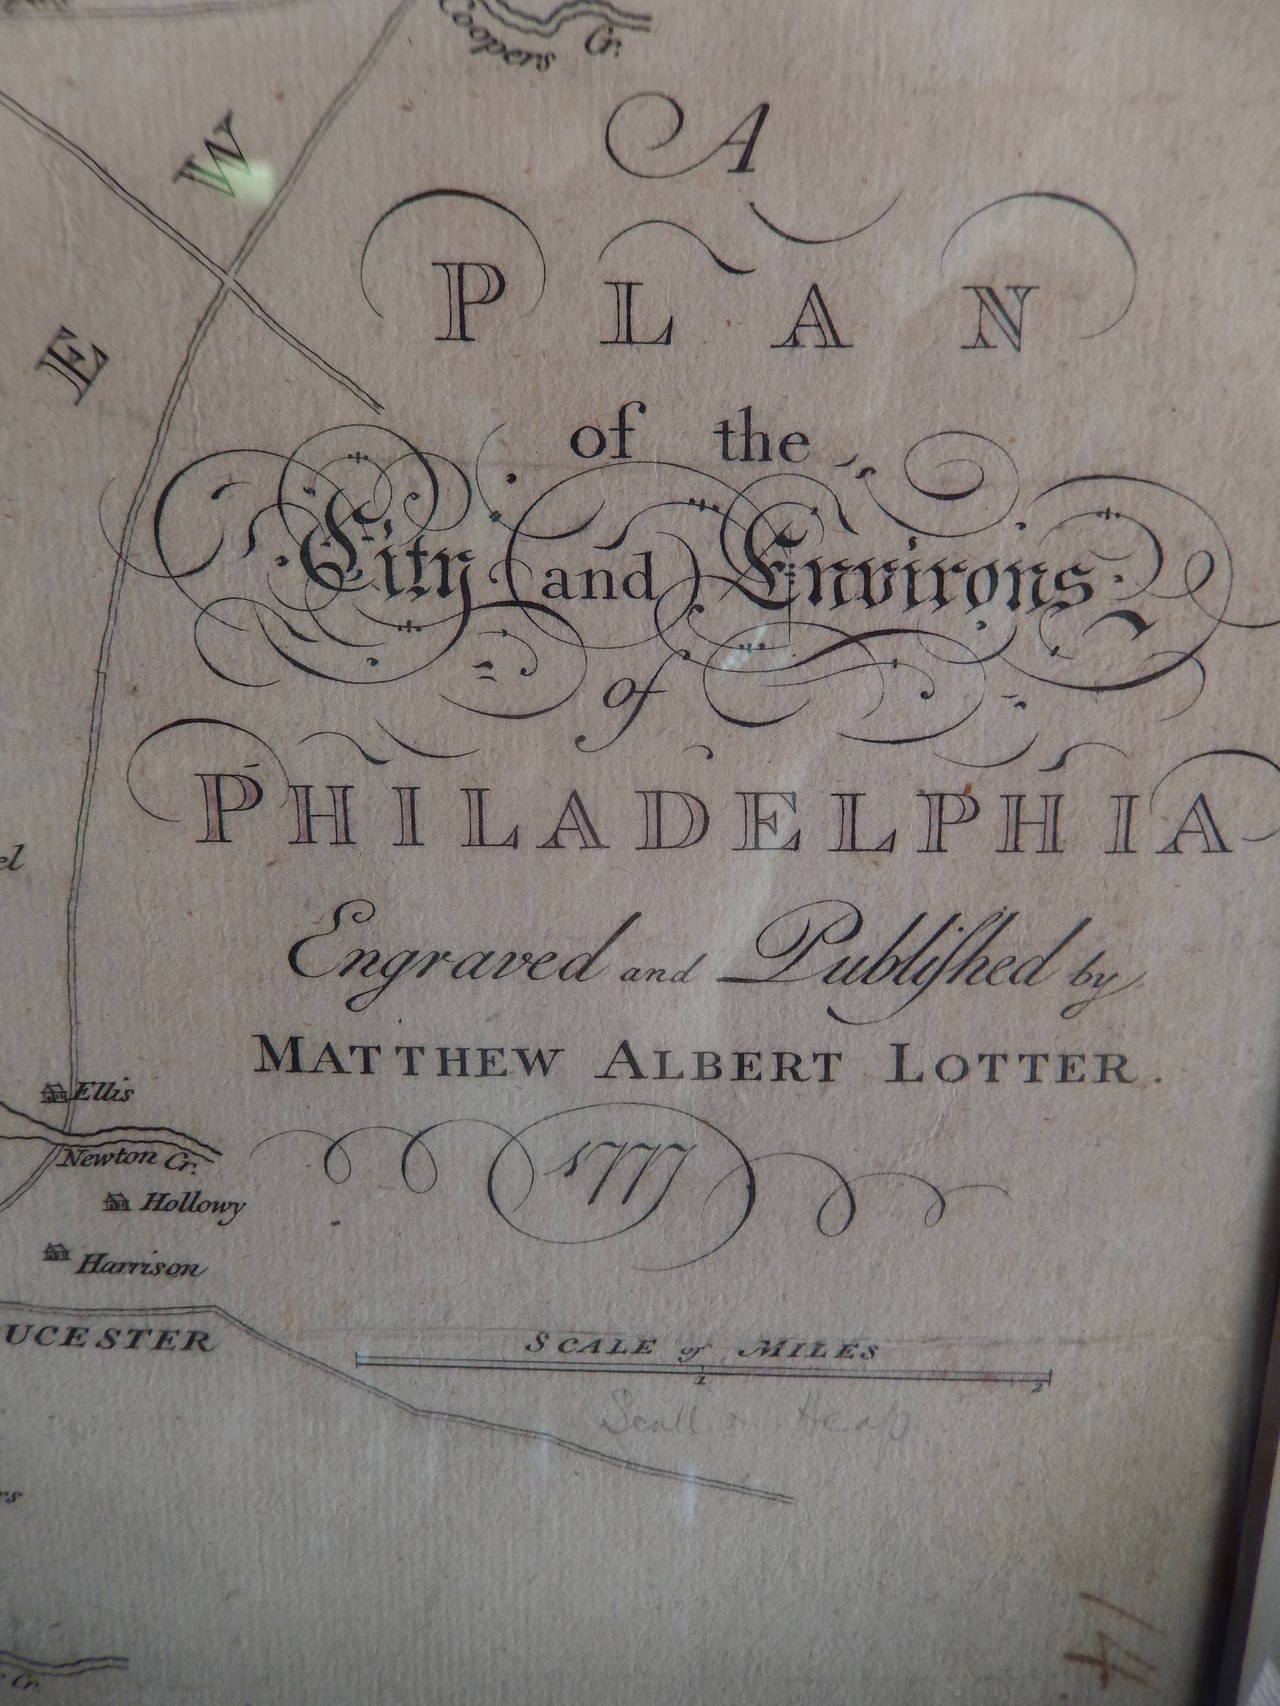 A superb, and rarely found original copperplate colored and engraved map of Philadelphia made in Augsburg, Germany by Matthew Albert Lotter, dating to 1777.

Measures 19